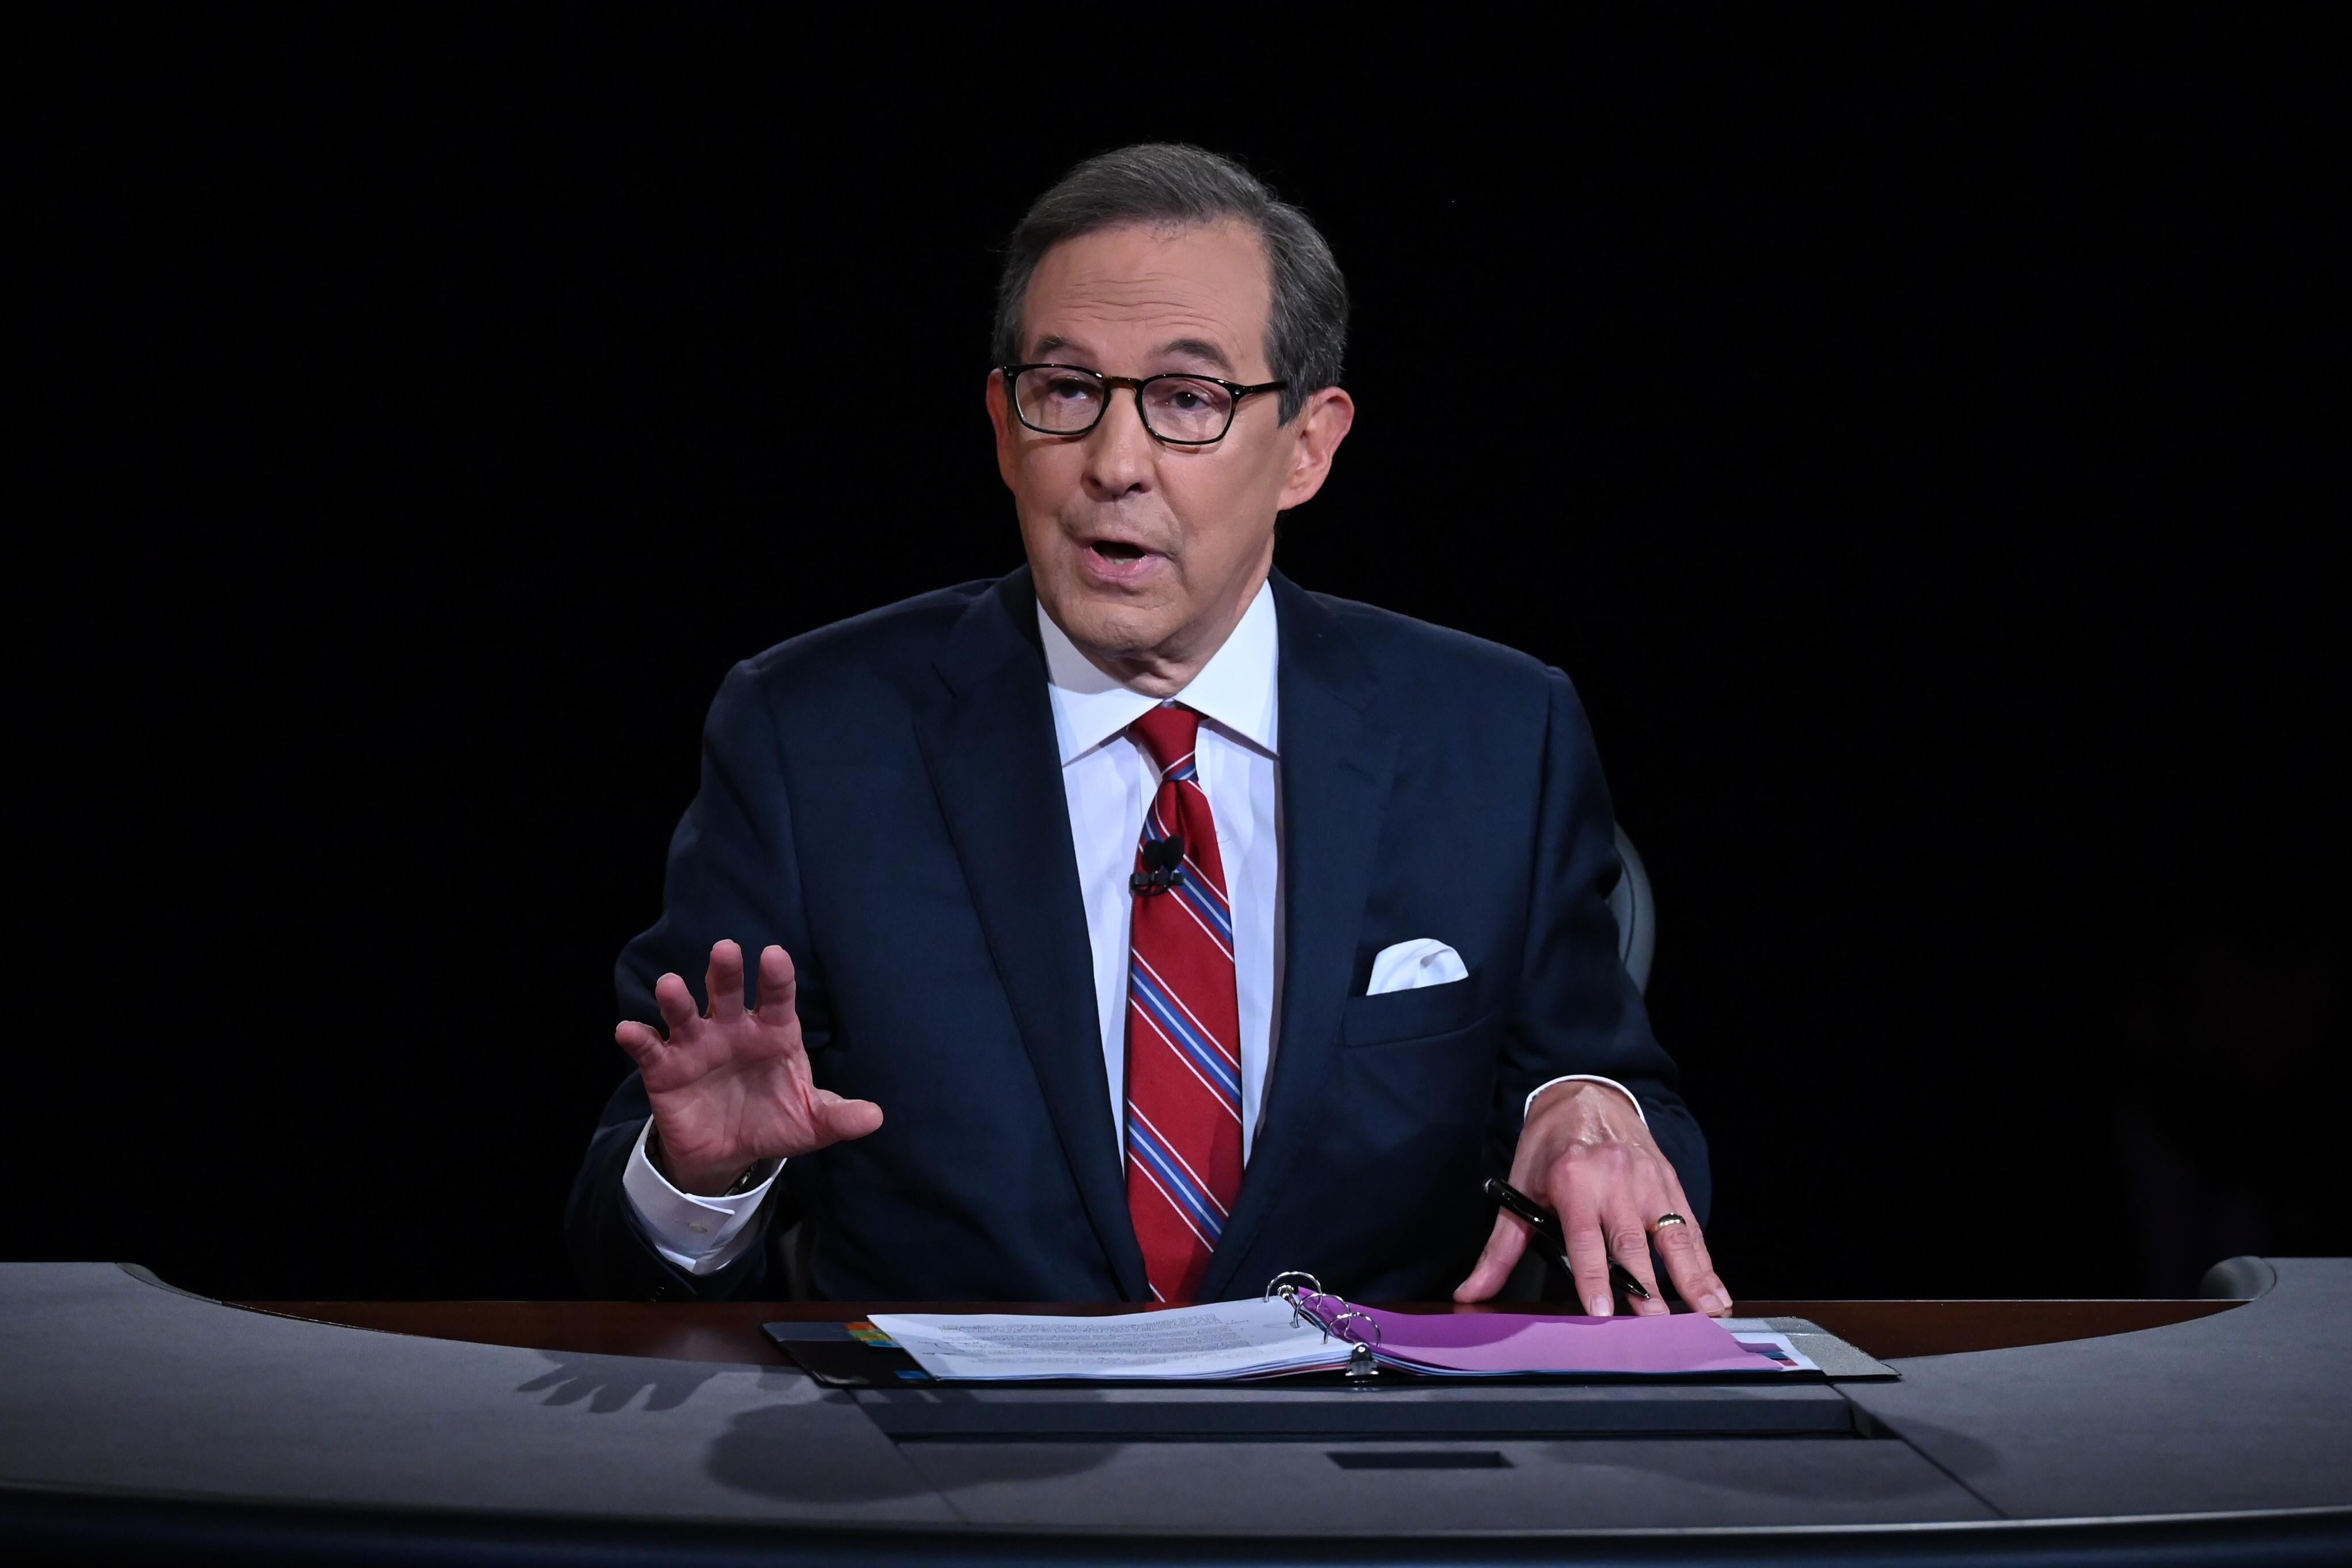 Fox News anchor Chris Wallace directs the first presidential debate between Donald Trump and Joe Biden at Case Western Reserve University on September 29, 2020 in Cleveland, Ohio.